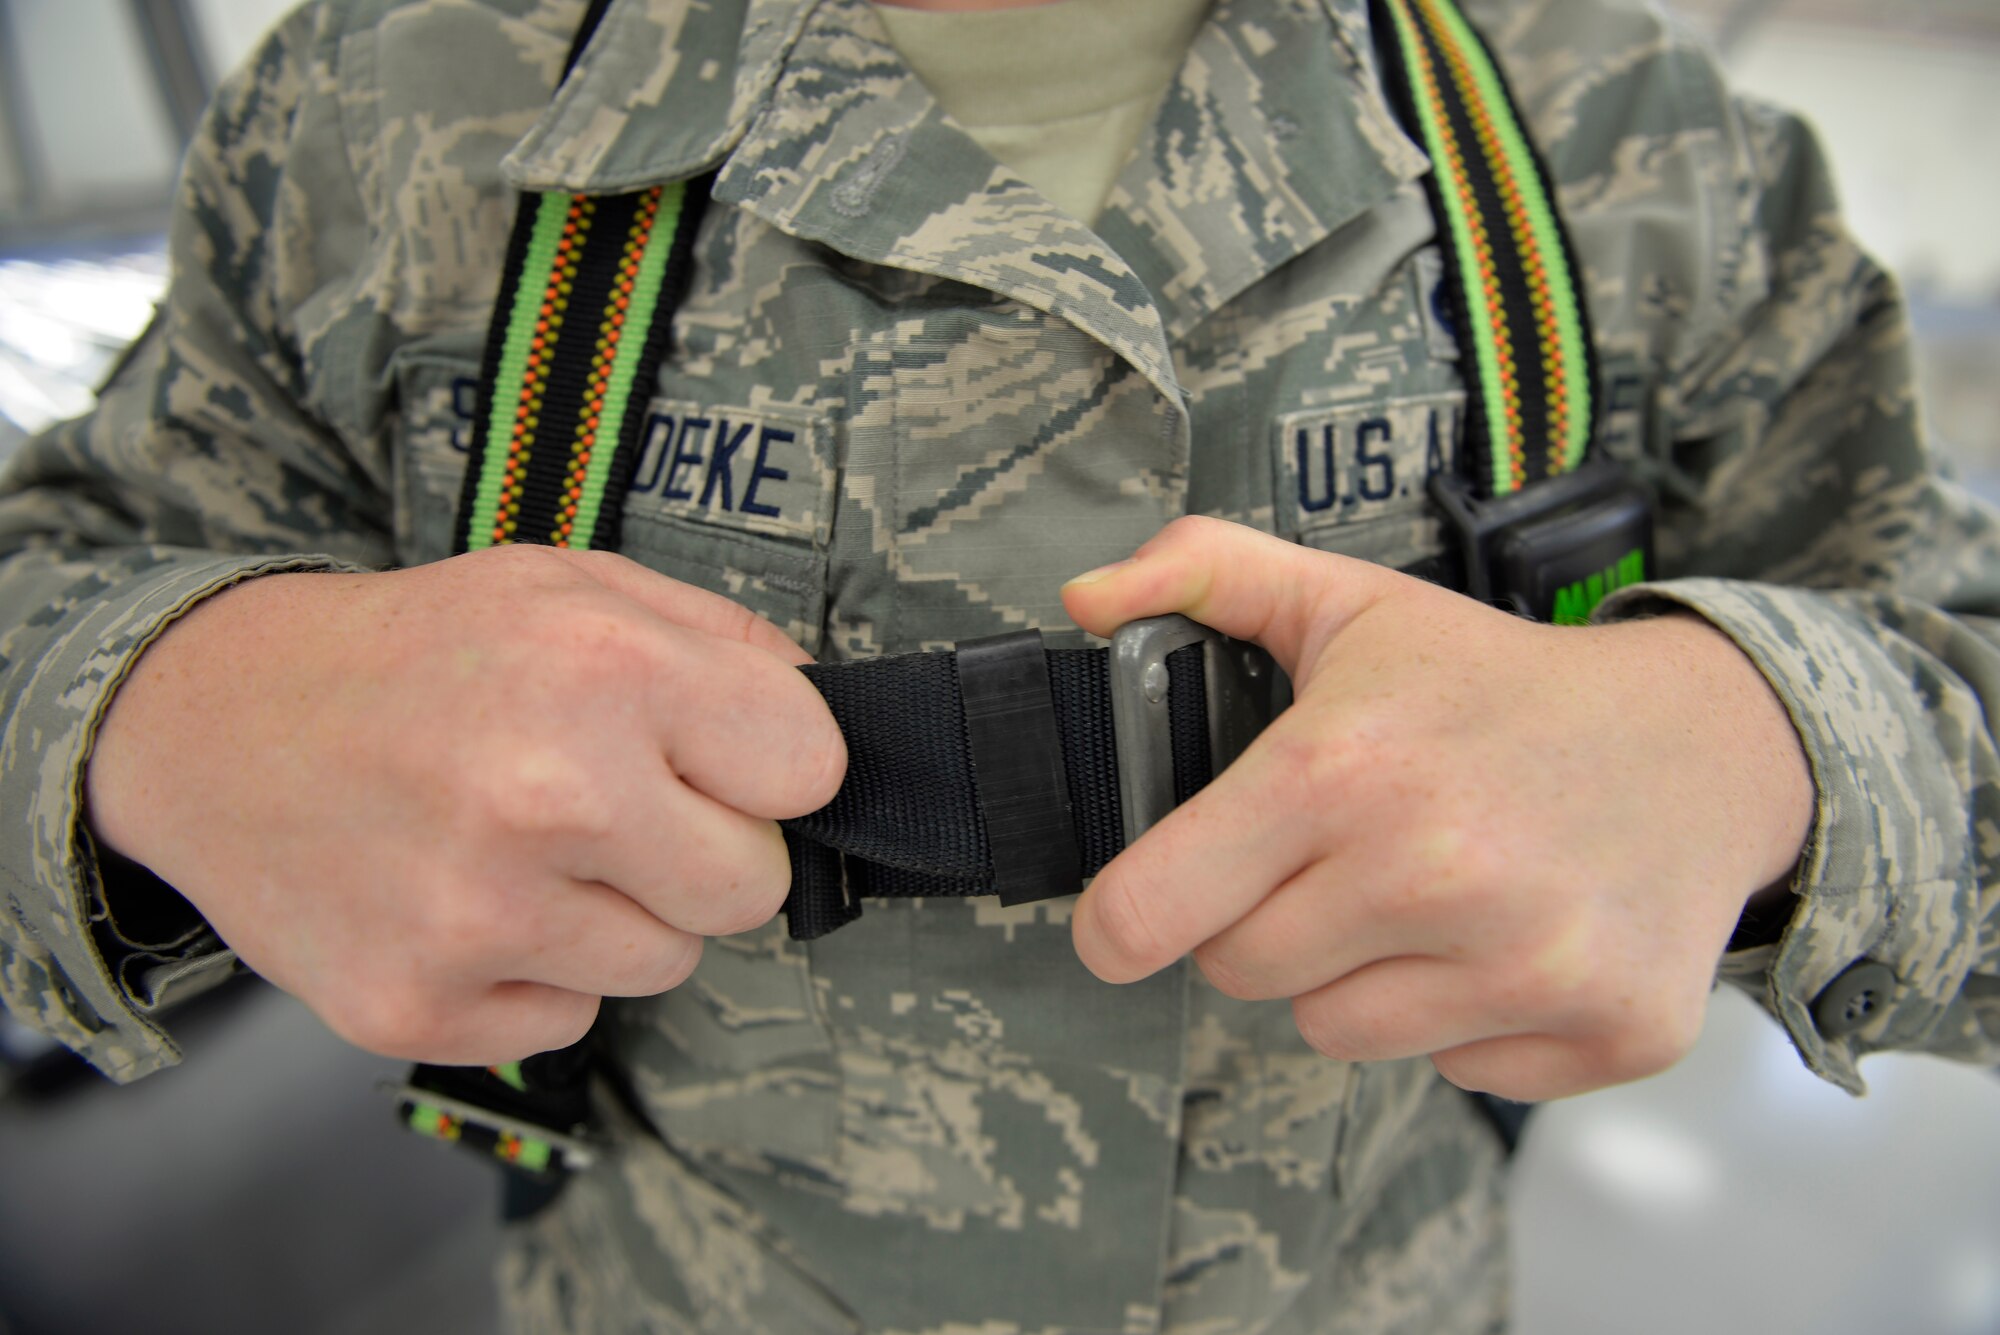 Senior Airman Samantha Schmedeke, 33rd Maintenance Squadron fuel systems journeyman, tightens her harness before conducting maintenance on an F-35A Lightning II at Eglin Air Force Base, Fla., May 16, 2016. Harnesses are a safety precaution to keep Airmen from falling when they maintain parts of the aircraft that must be accessed from on top of the jet. (U.S. Air Force photo/Senior Airman Andrea Posey)